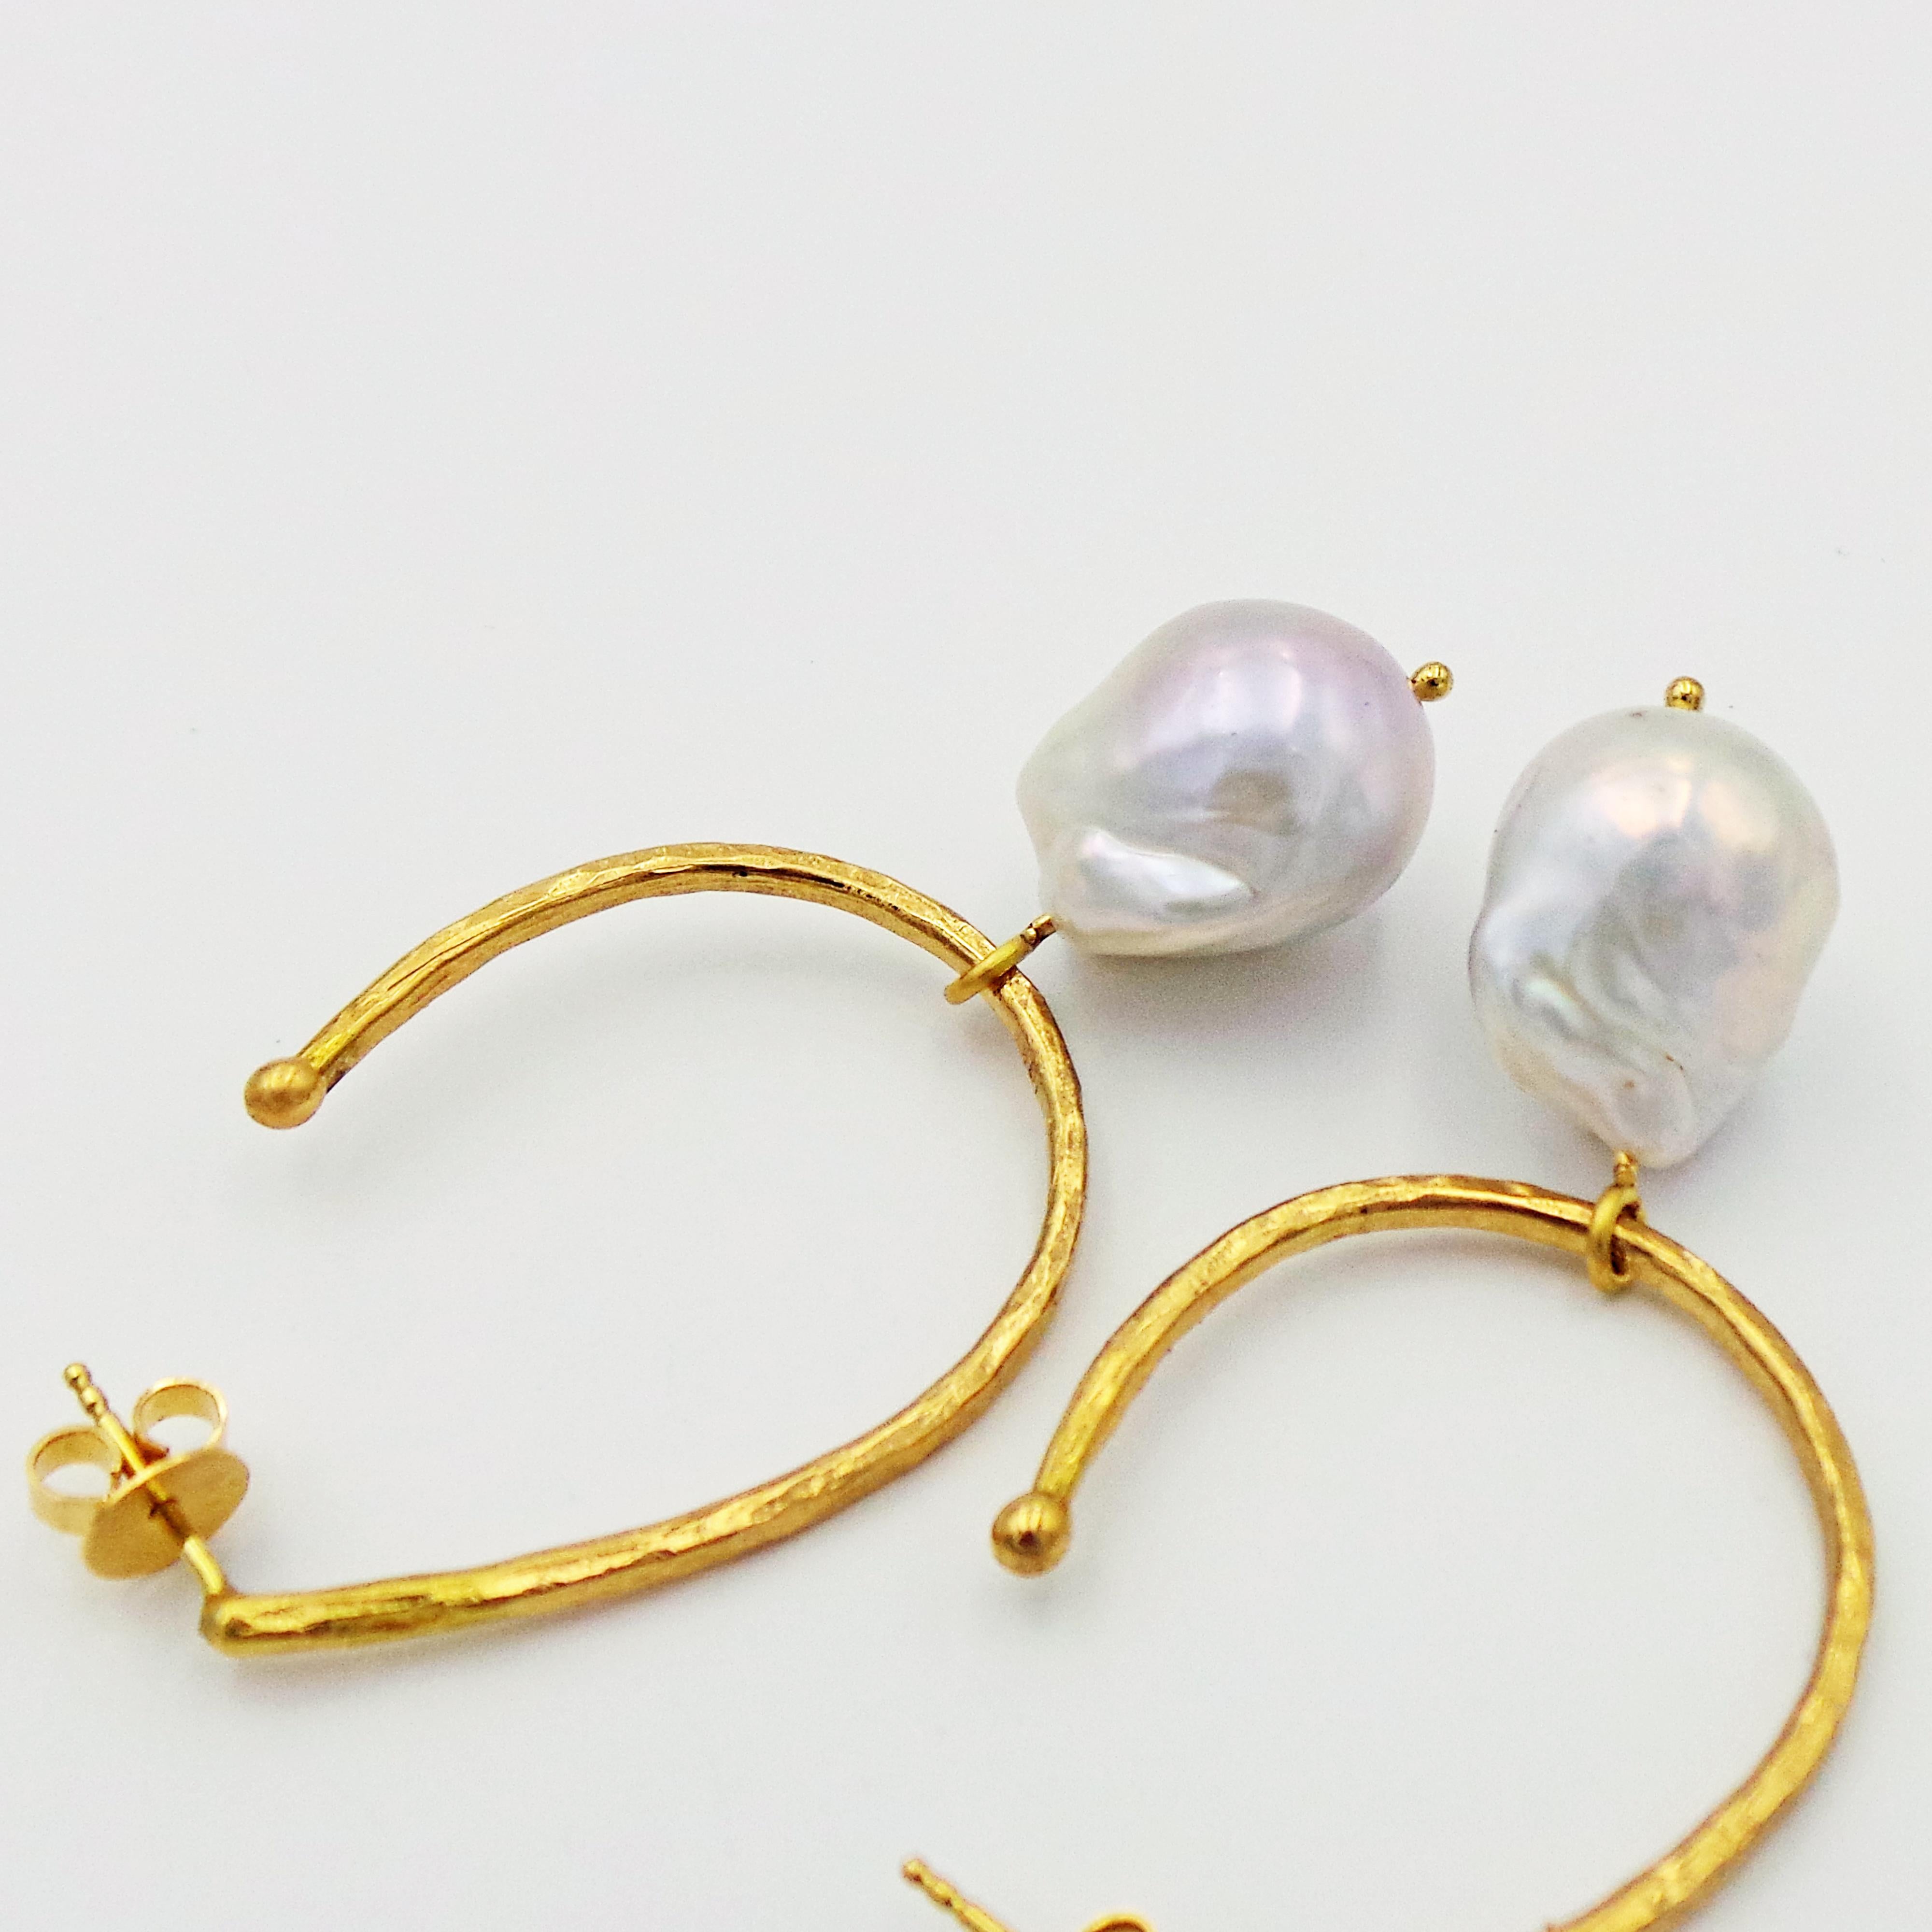 Hammered 18k yellow gold elongated hoop stud earrings with Freshwater Baroque Pearls and 18k yellow gold charms.  Charms may be removed, and the hoops may be worn by themselves, providing two styles to choose from. Gorgeous, unique and versatile